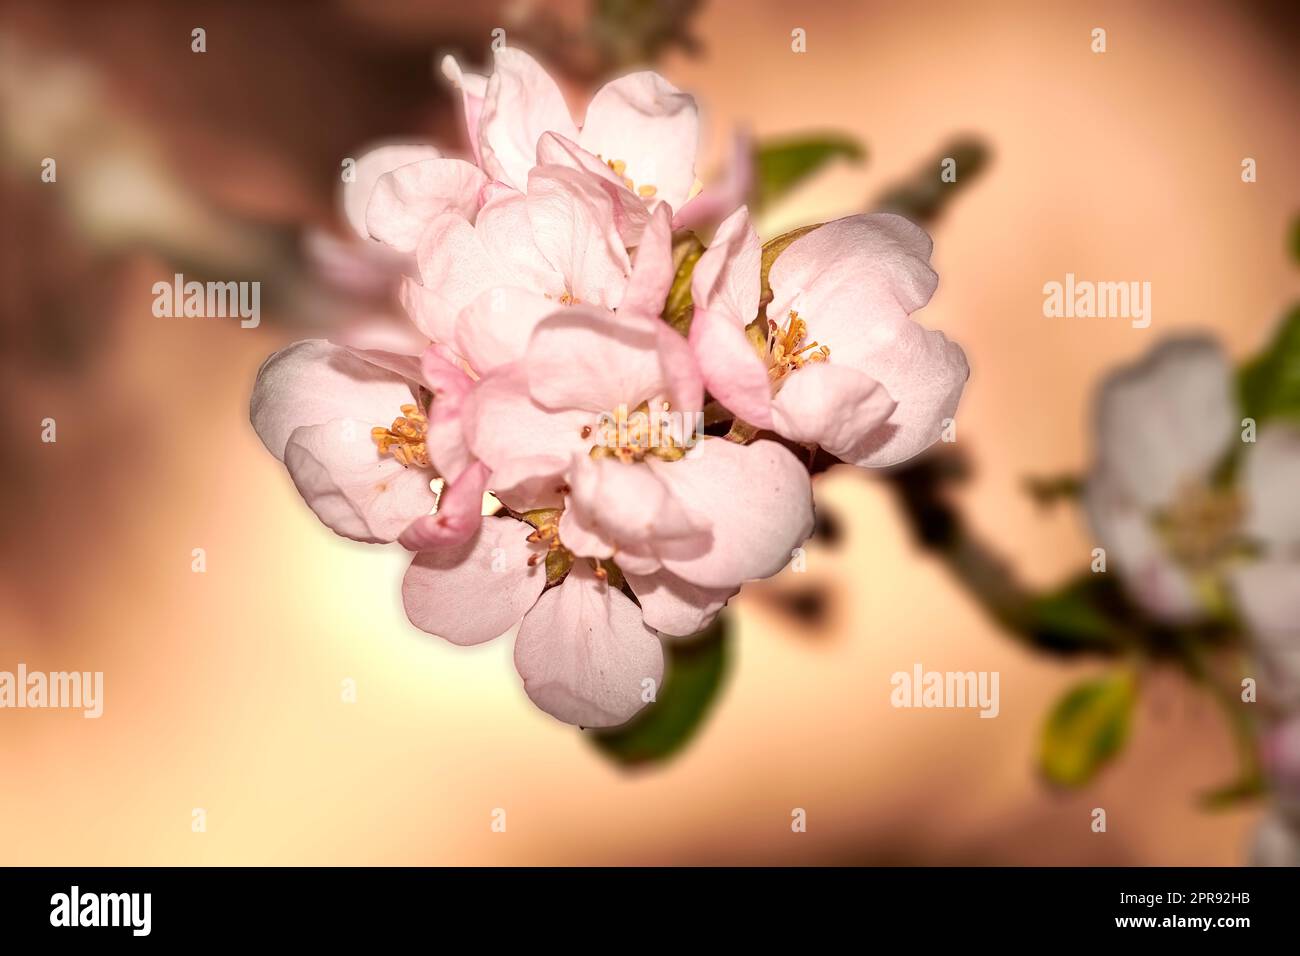 Colorful pink flowers growing in a garden. Closeup of beautiful japanese quince or chaenomeles japonica from the rose species with vibrant petals blooming and blossoming in nature during spring Stock Photo